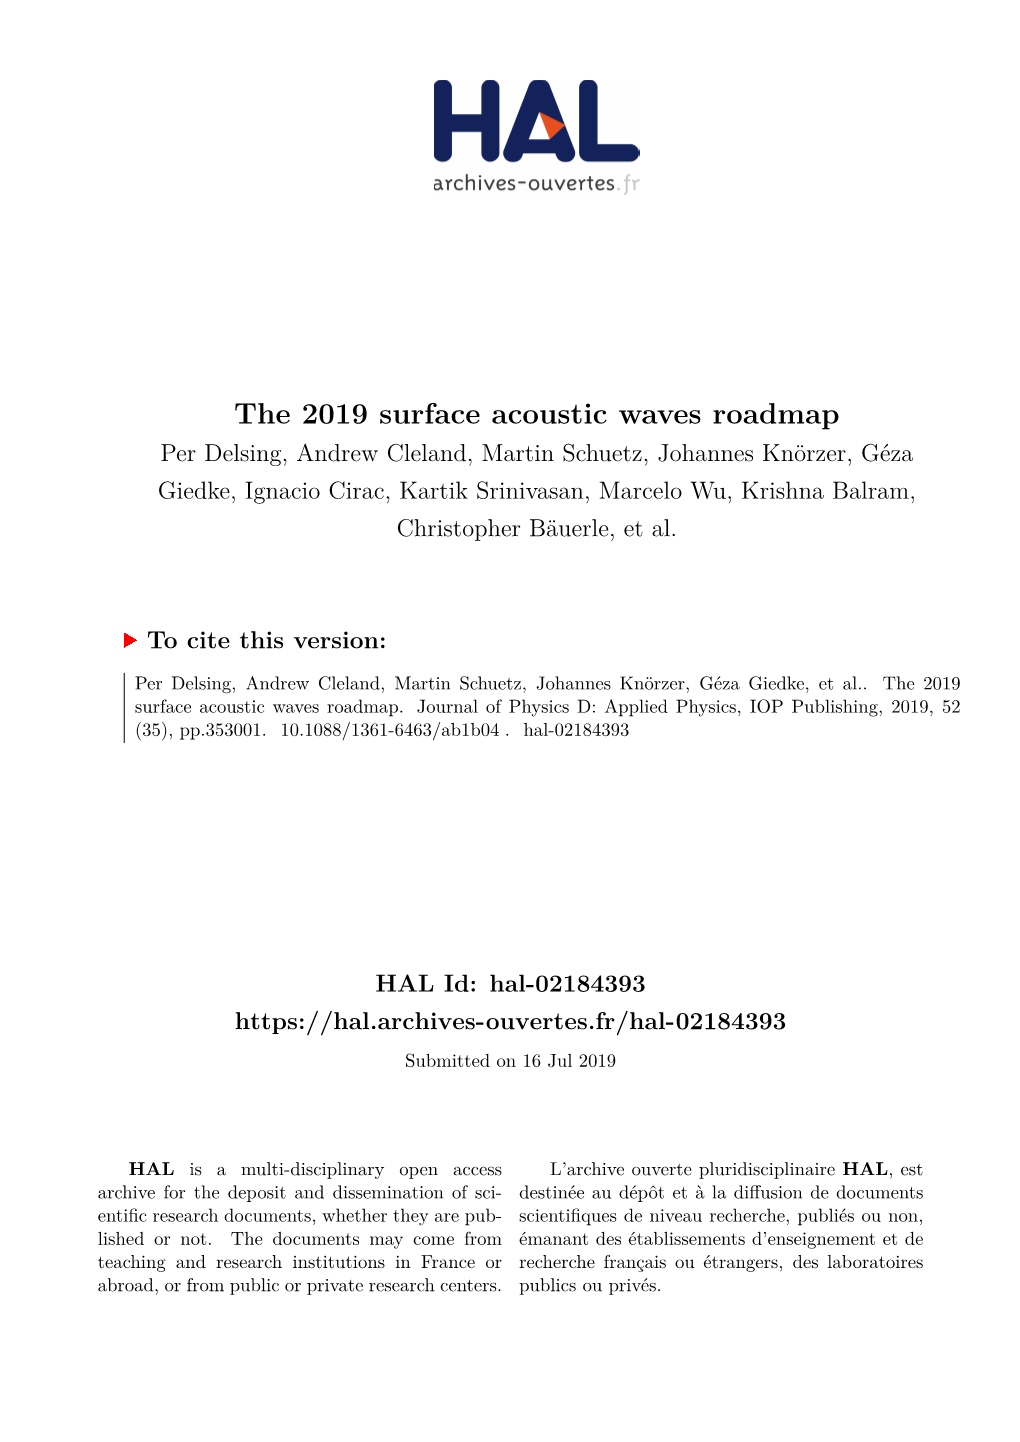 The 2019 Surface Acoustic Waves Roadmap